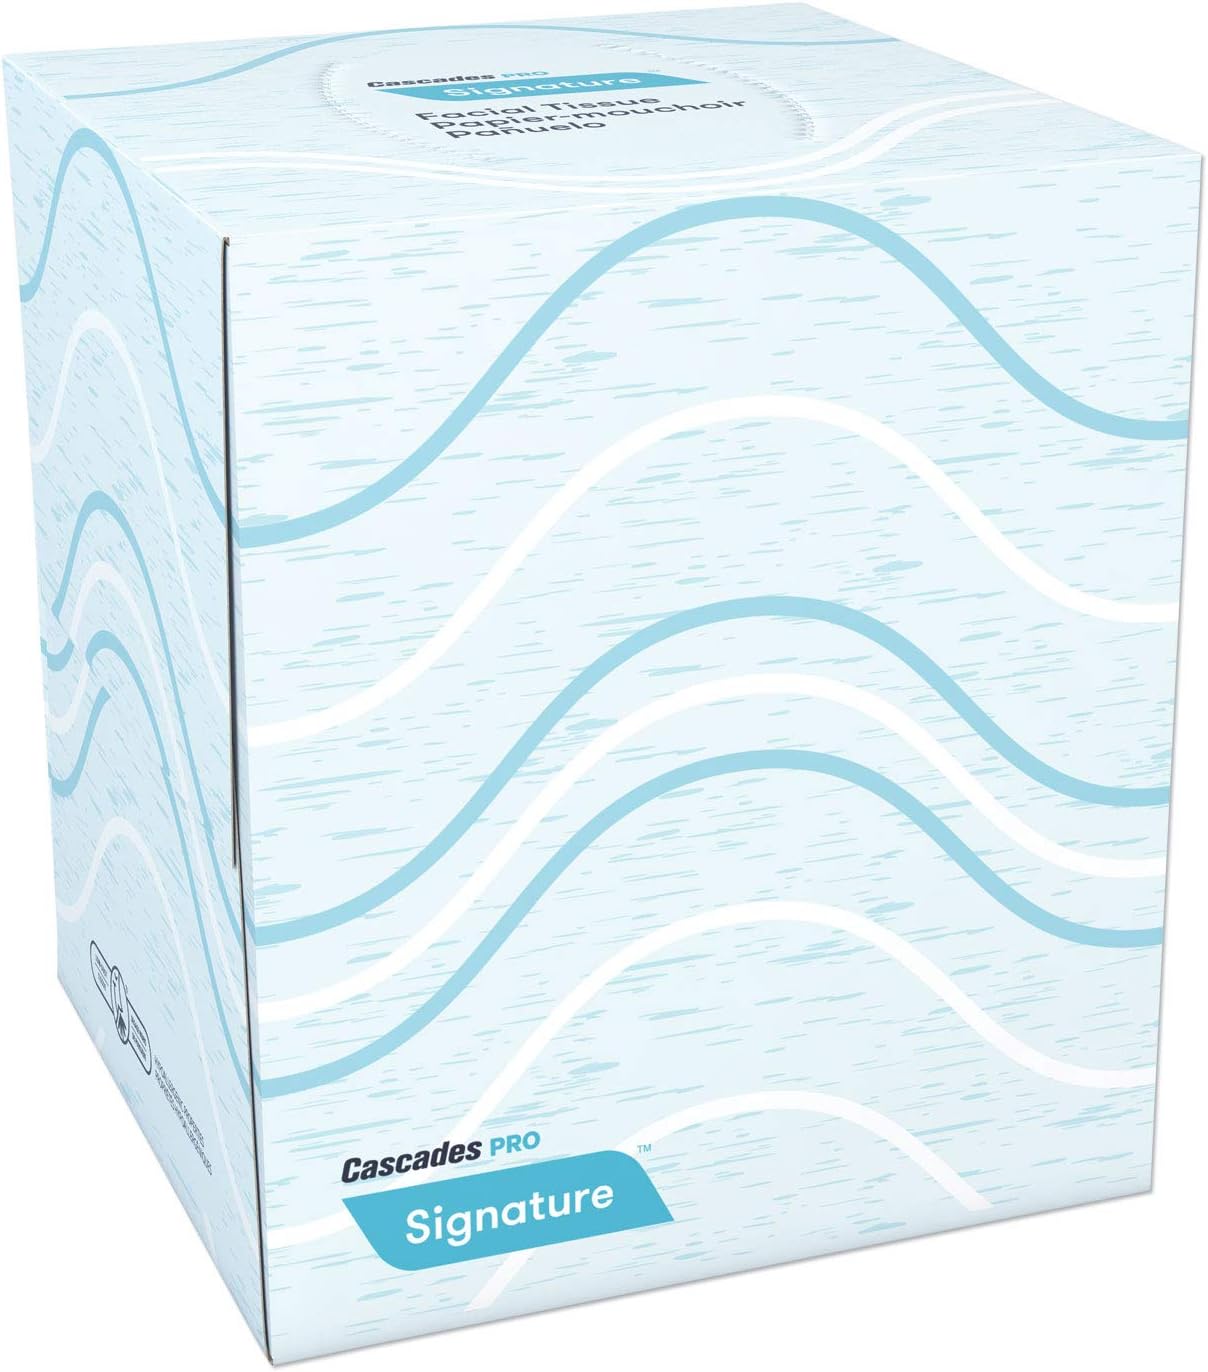 Signature Facial Tissue, 2-Ply, White, Cube, 90 Sheets/Box - 36 Boxes/Case